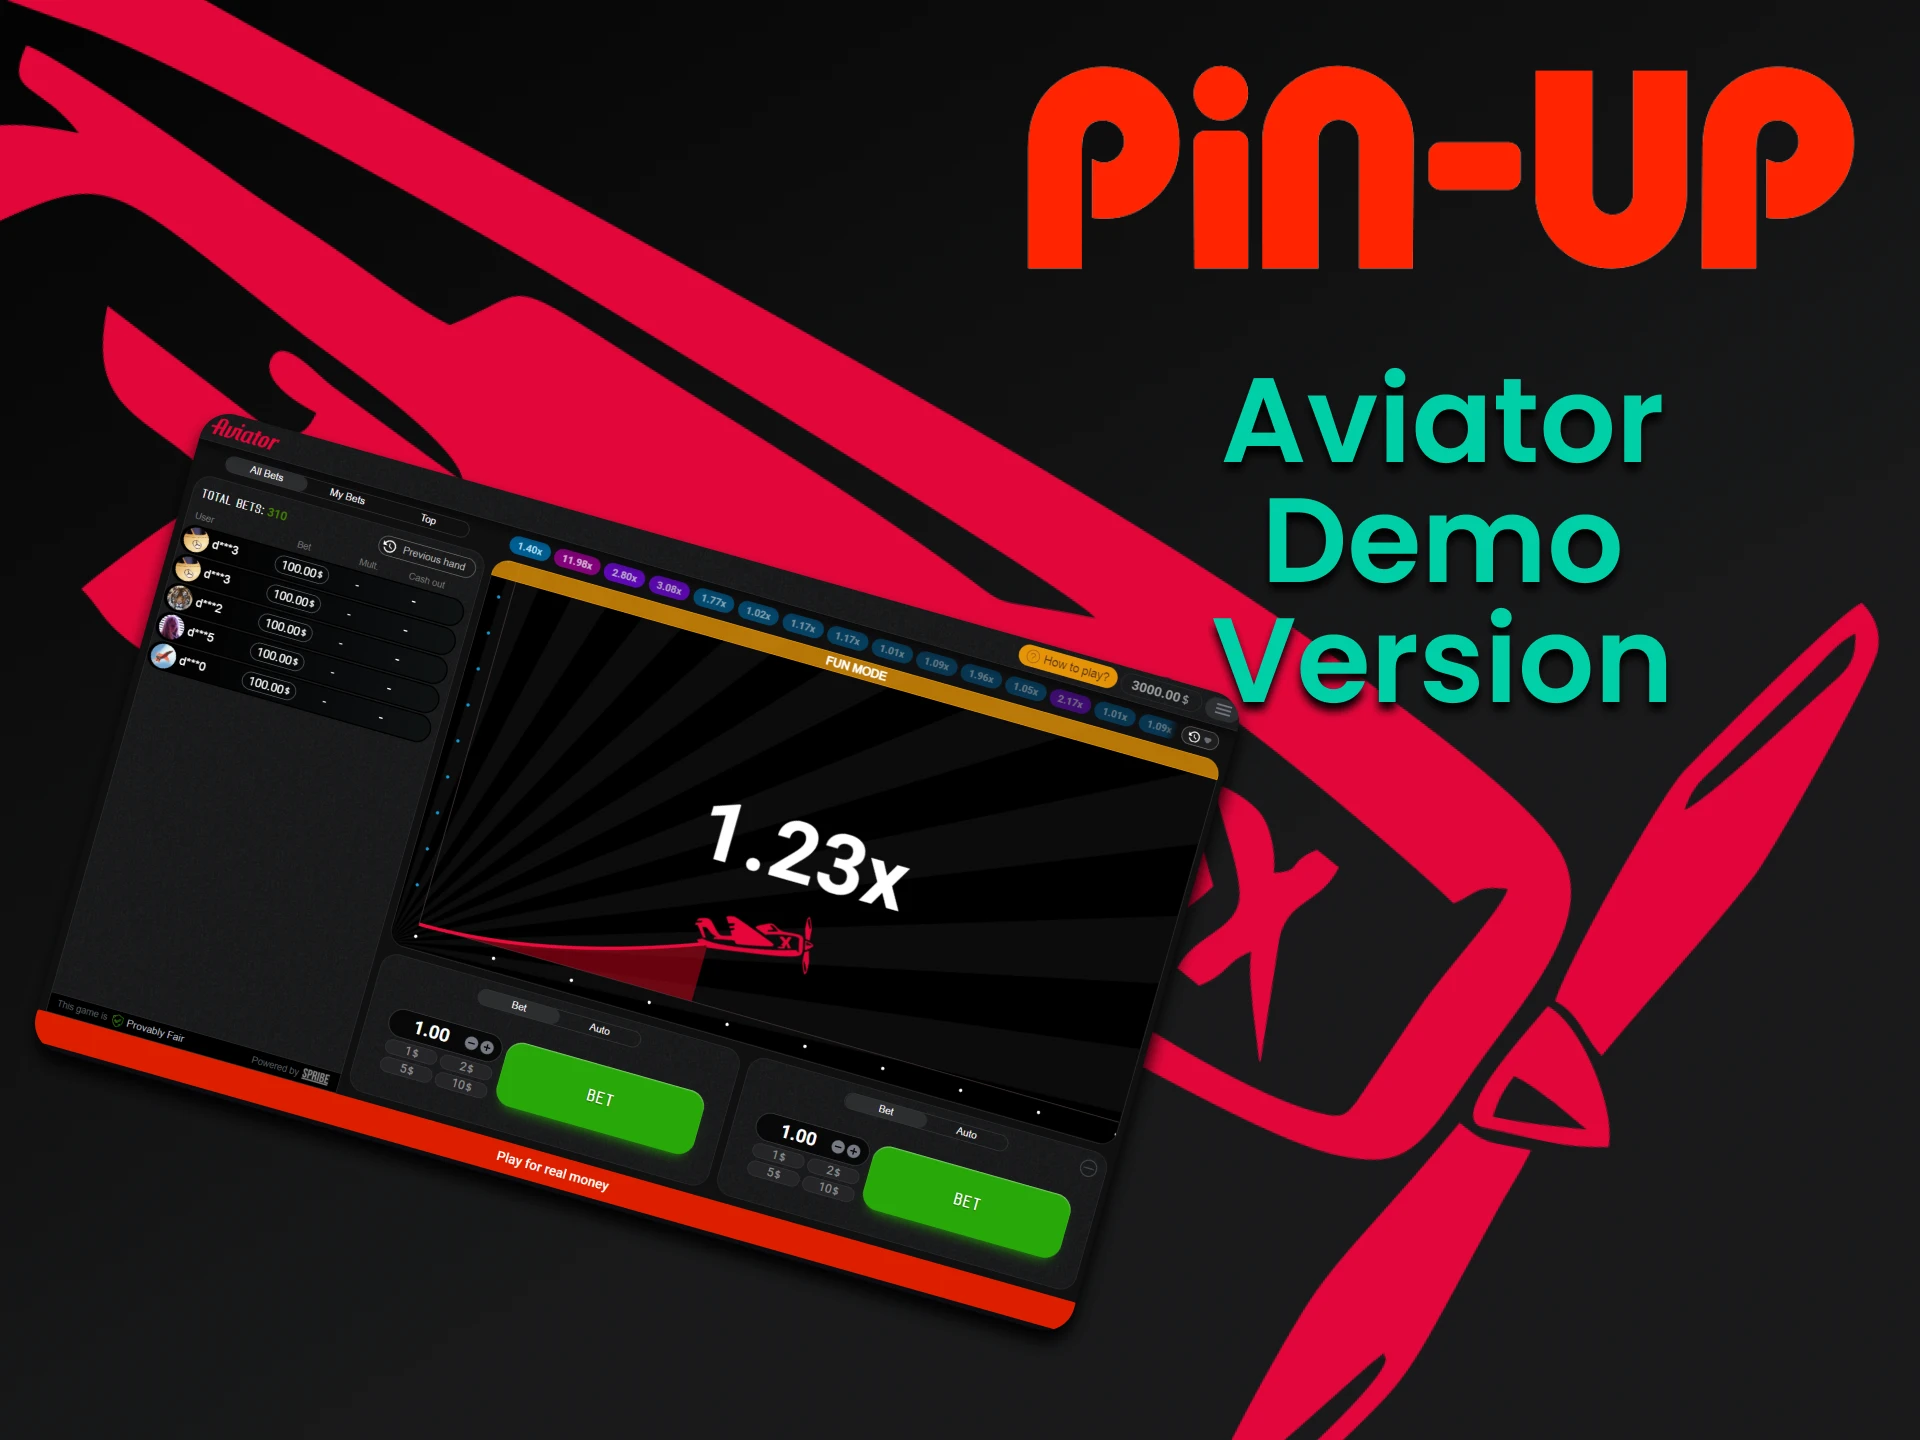 In order not to risk real money, you can try the game in the demo version from Pin Up.